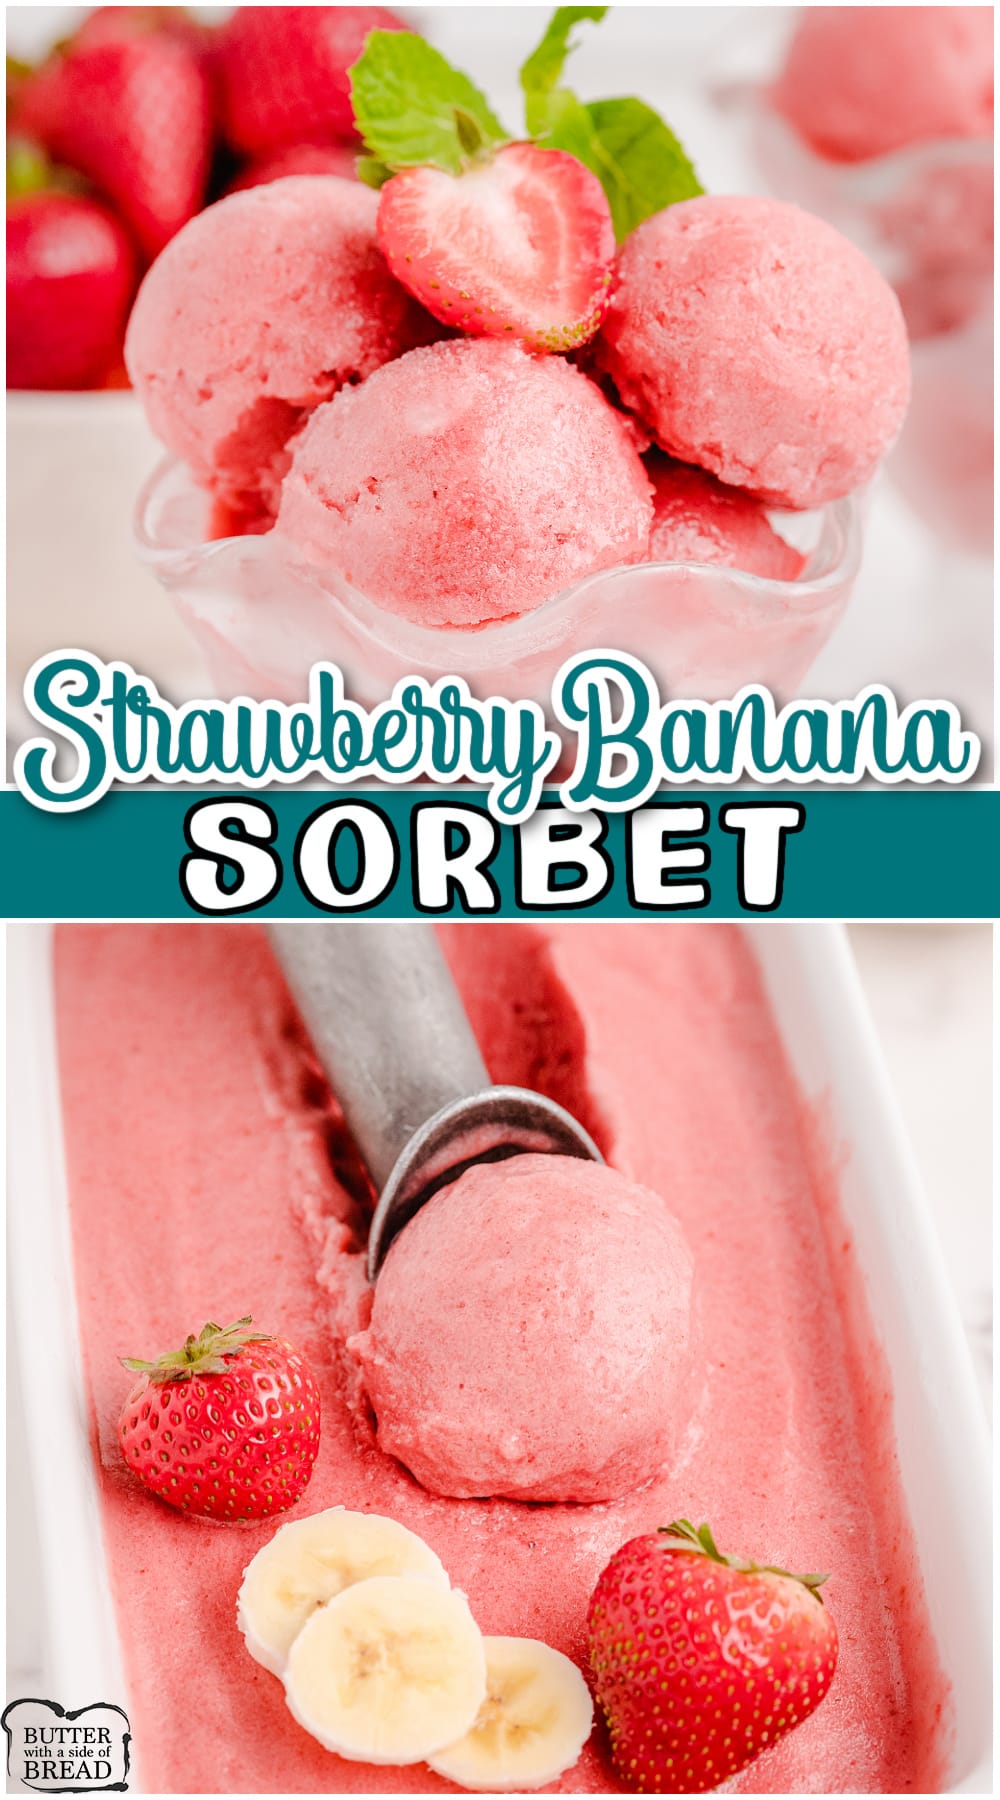 Strawberry Sorbet Recipe made easily with fresh berries, ripe bananas & honey! These simple steps show how to make sorbet at home with common ingredients you already have!